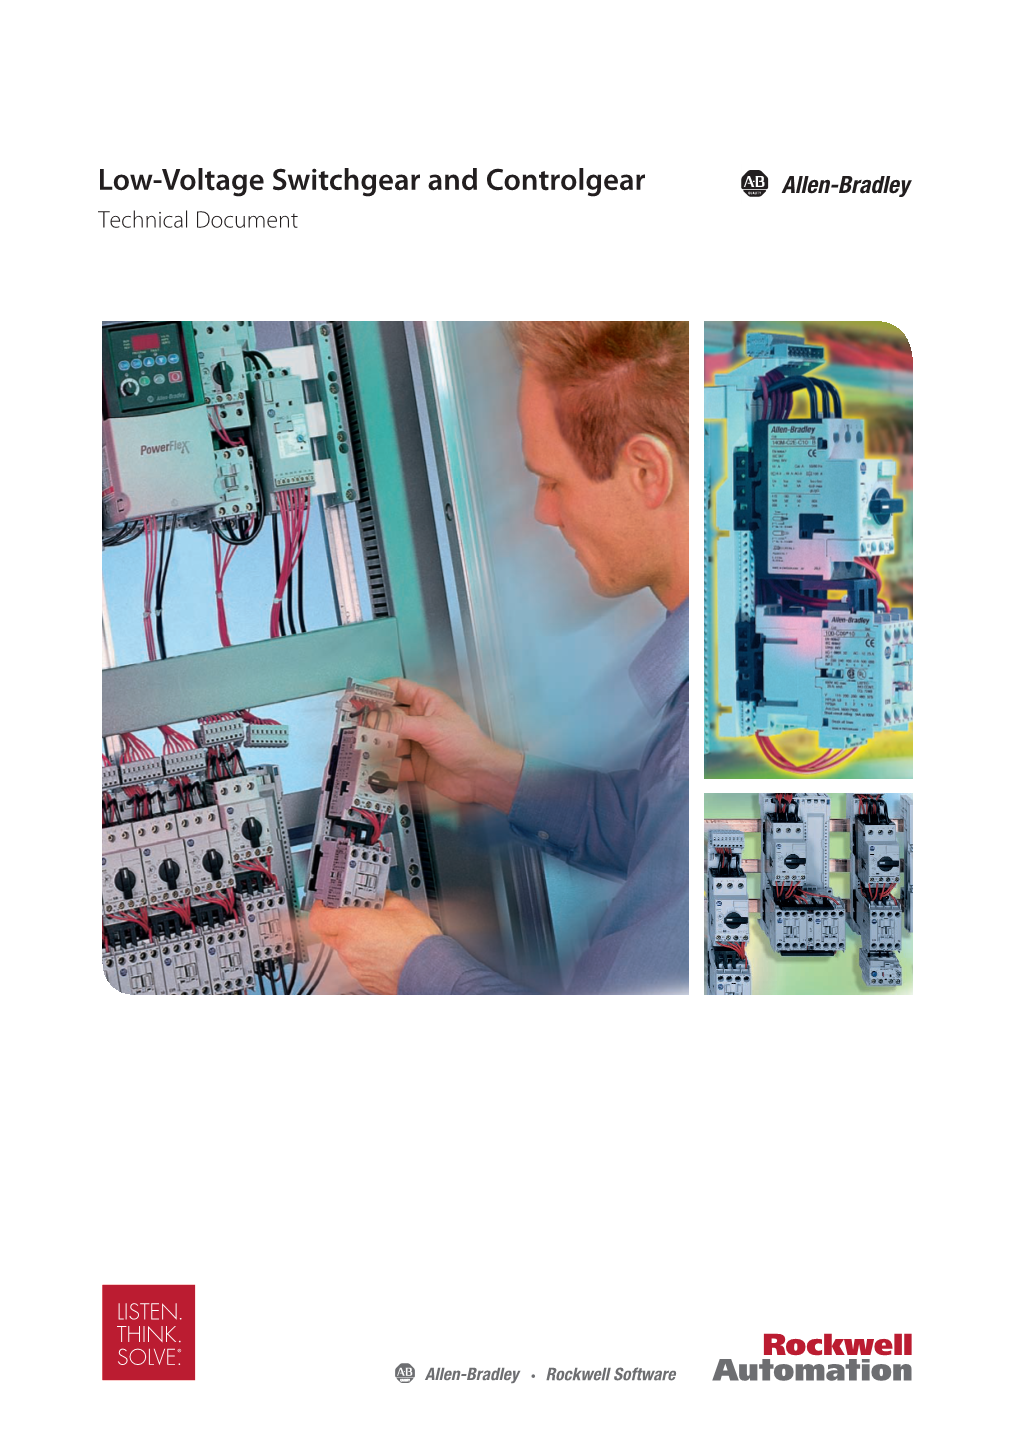 Low Voltage Switchgear and Controlgear Technical Document